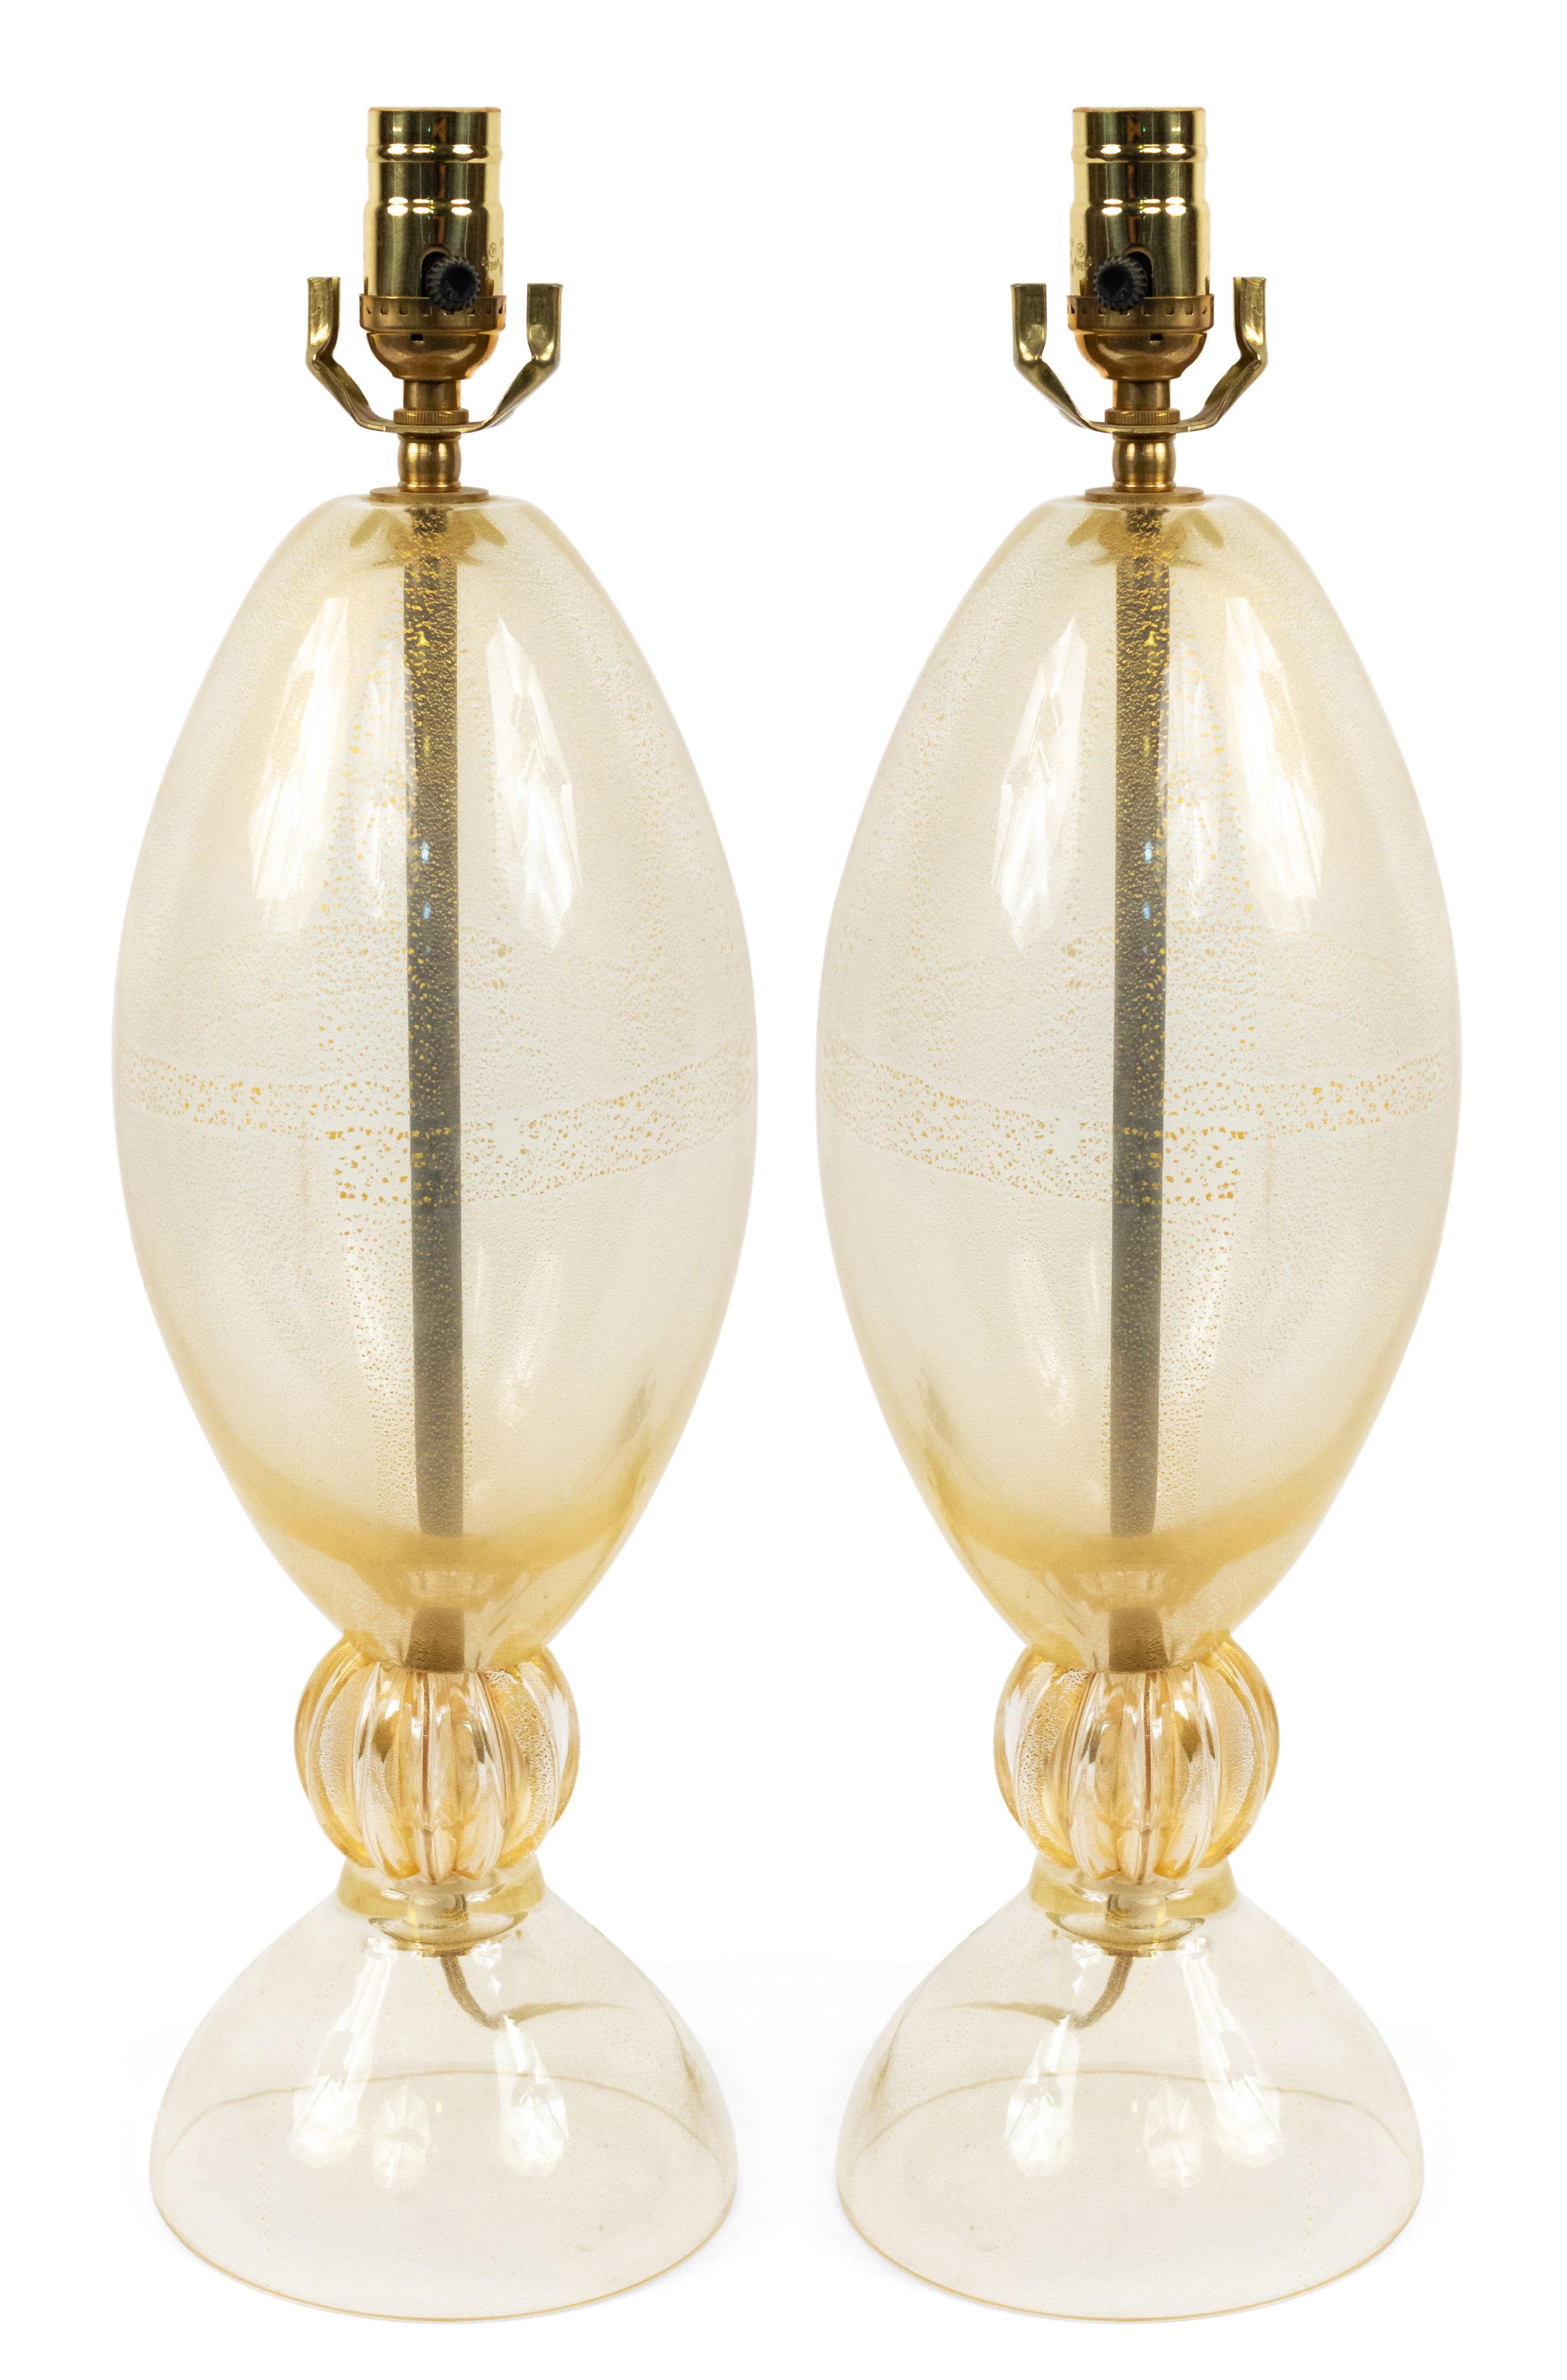 Pair of Italian Venetian 1940s gold dust Murano glass lamps with a shaped form separated by a fluted section.

 